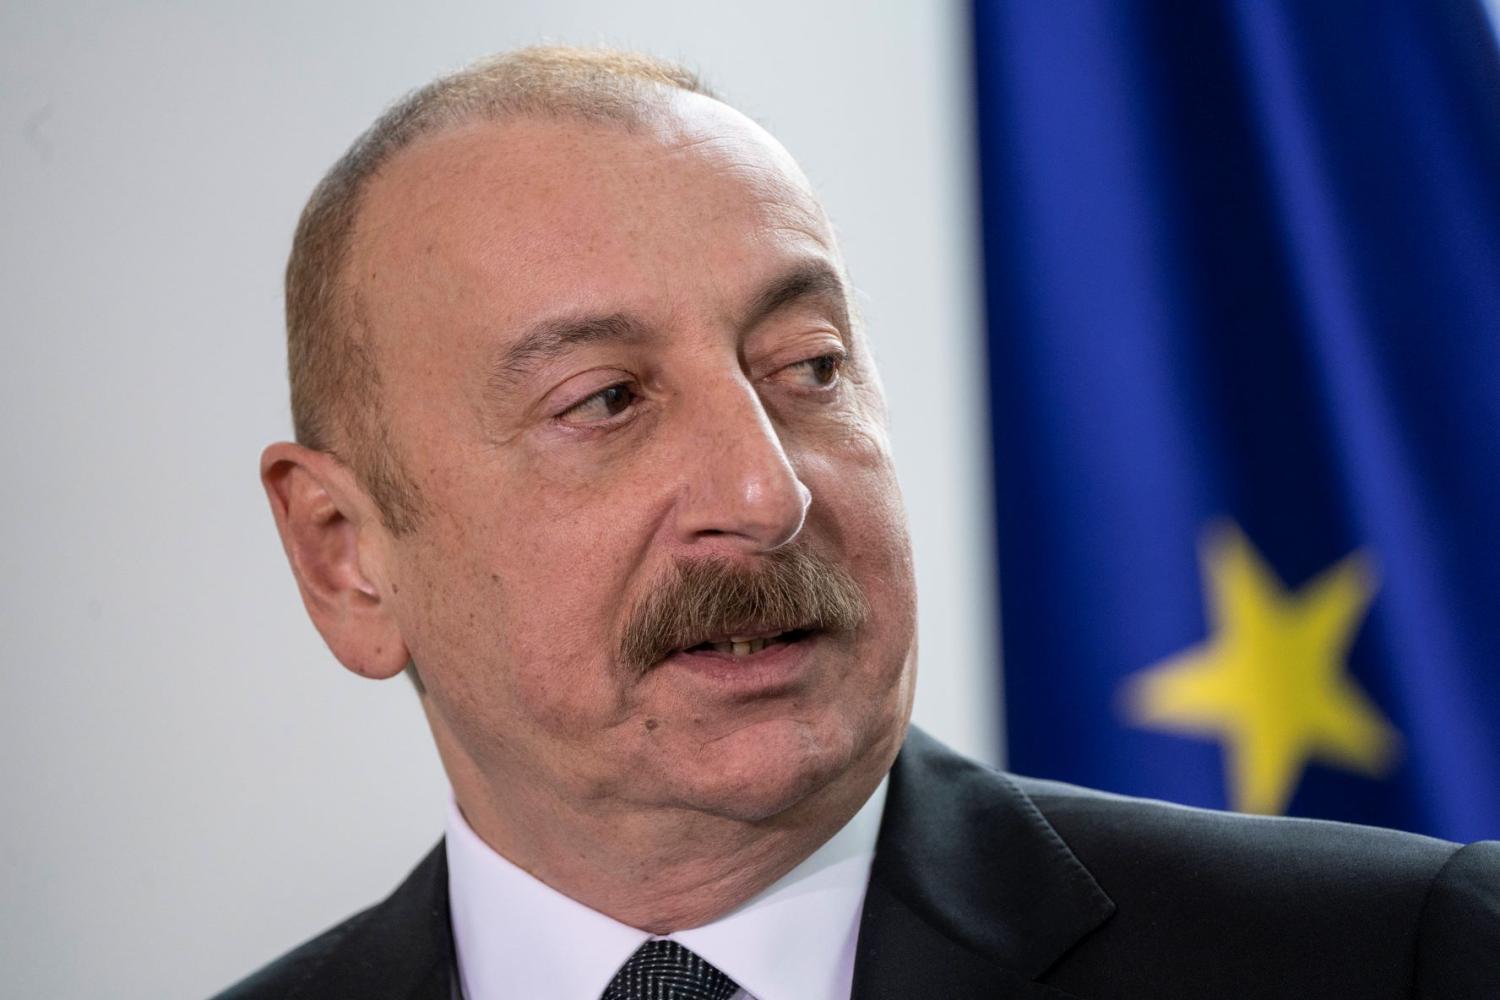 Azerbaijan's president, Ilham Aliyev, attends a joint press conference in Berlin, Germany, March 13, 2023.